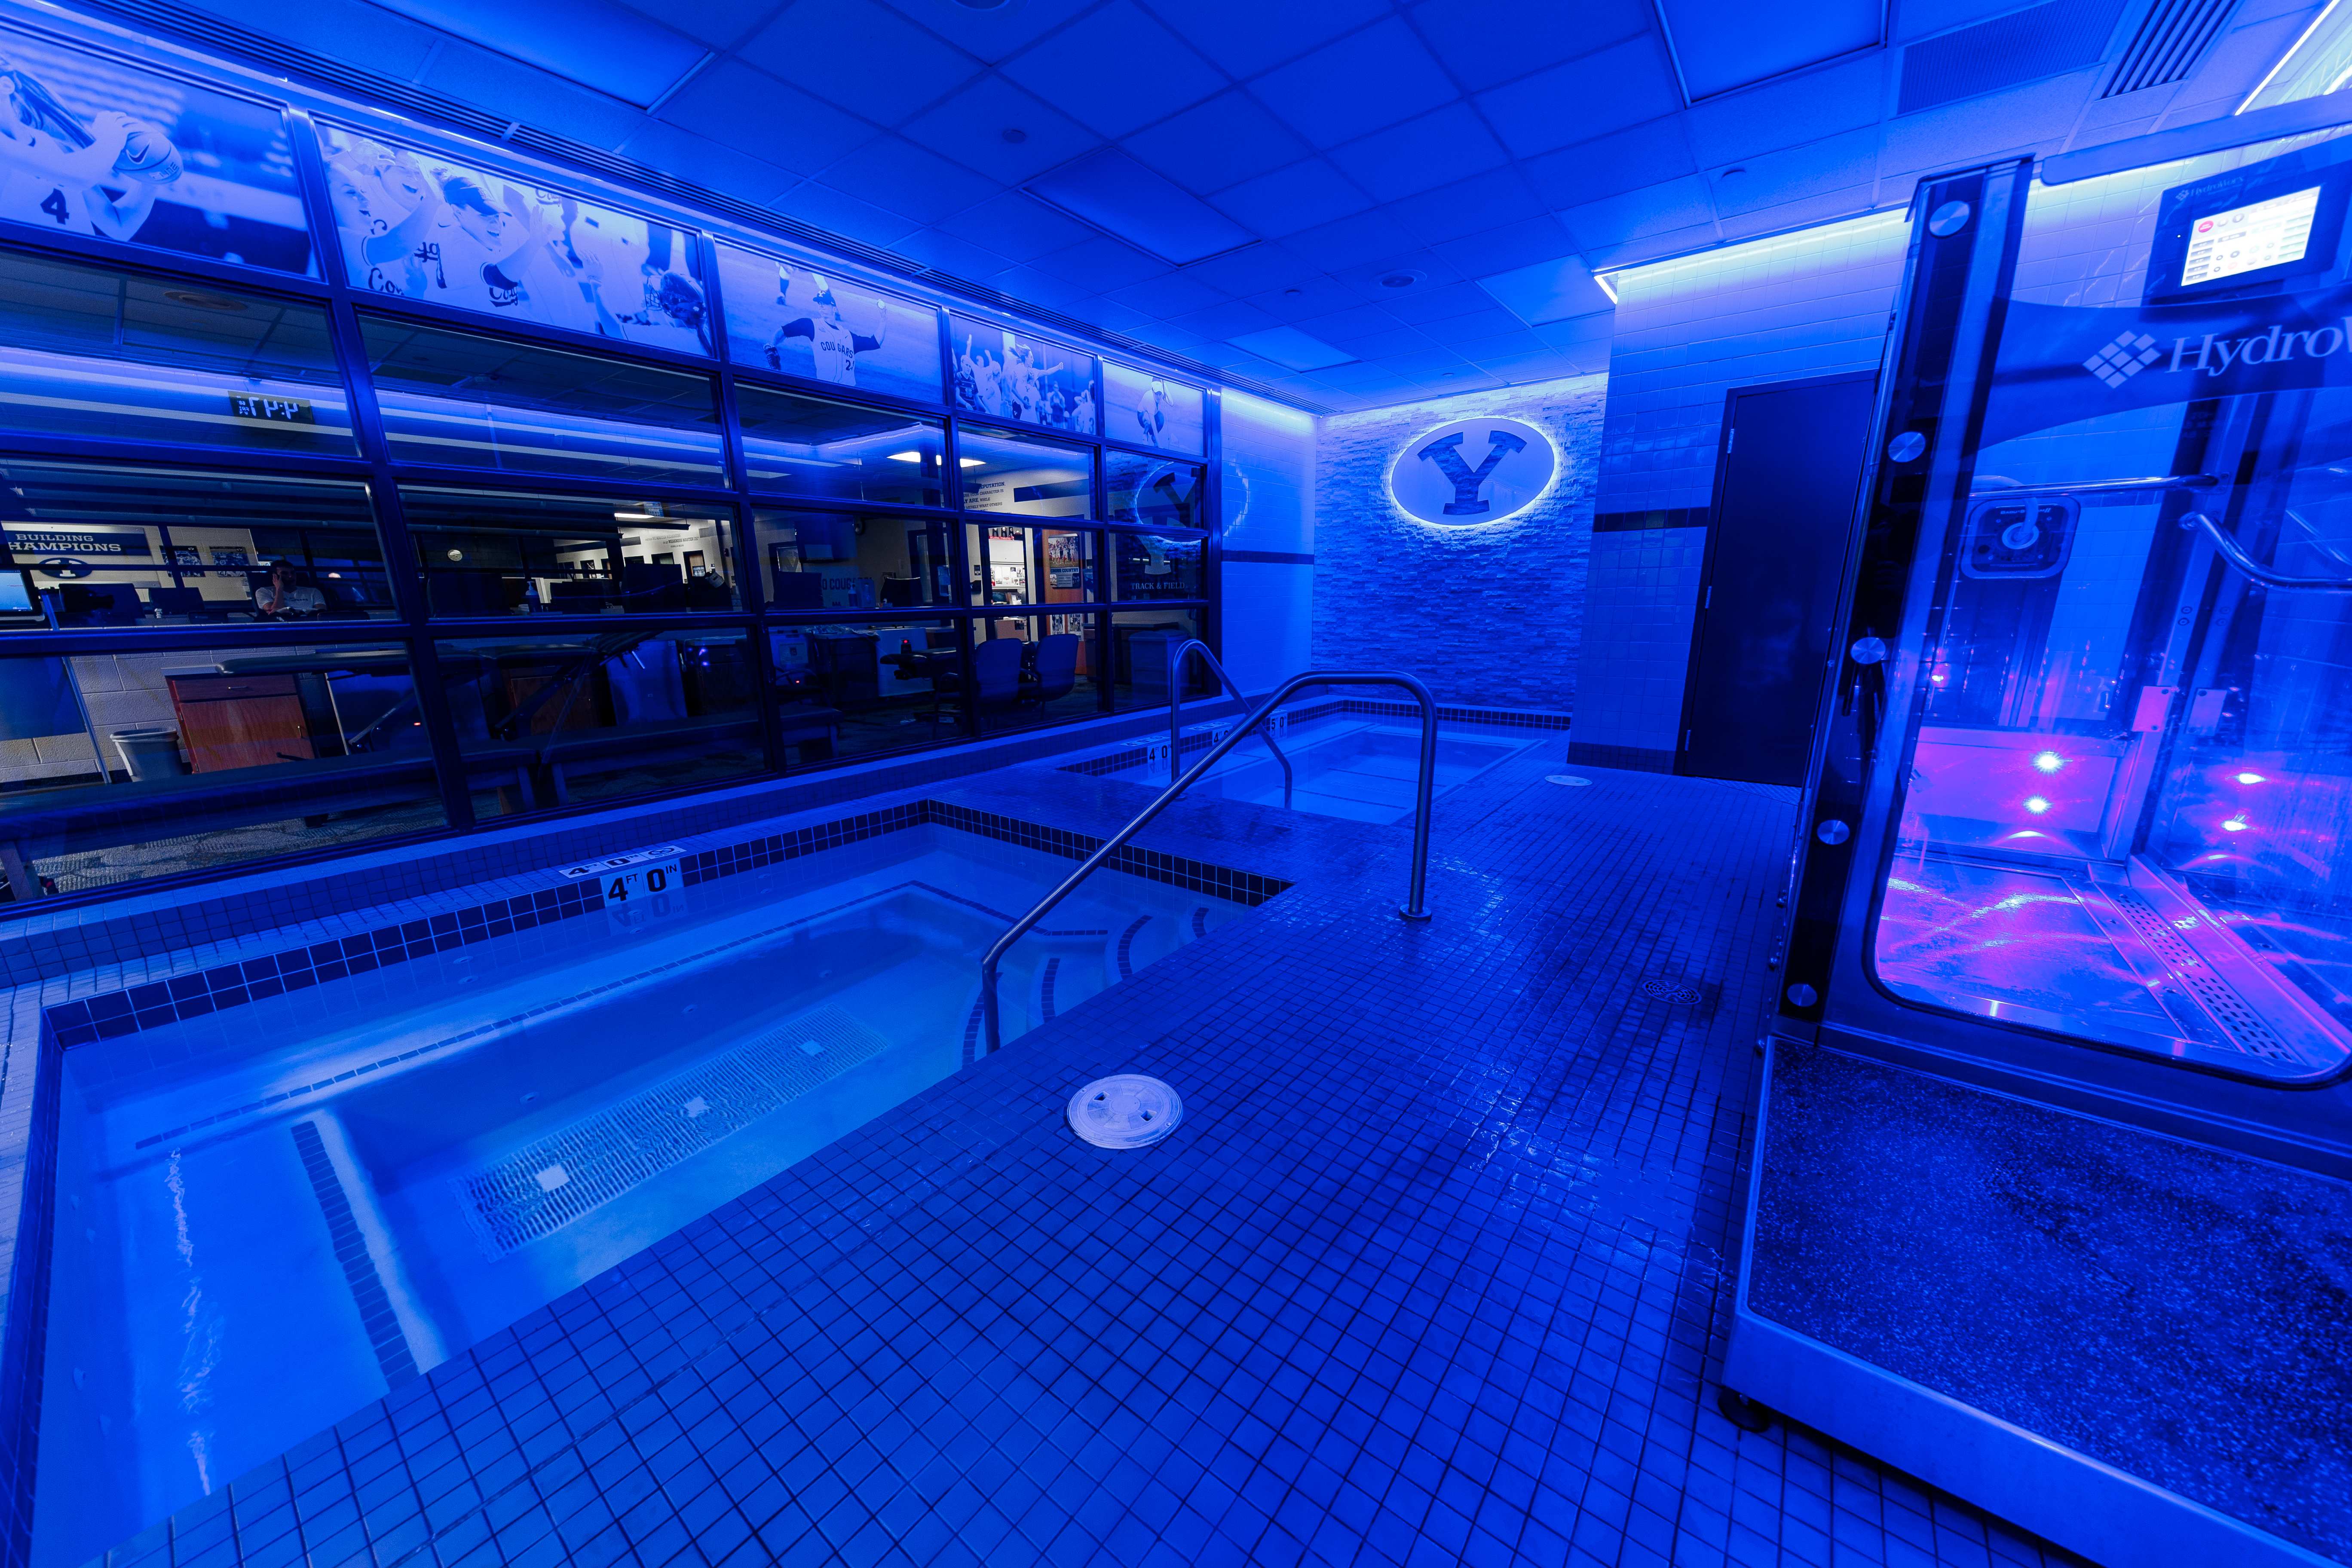 Therapy pool facility with neon lights lit